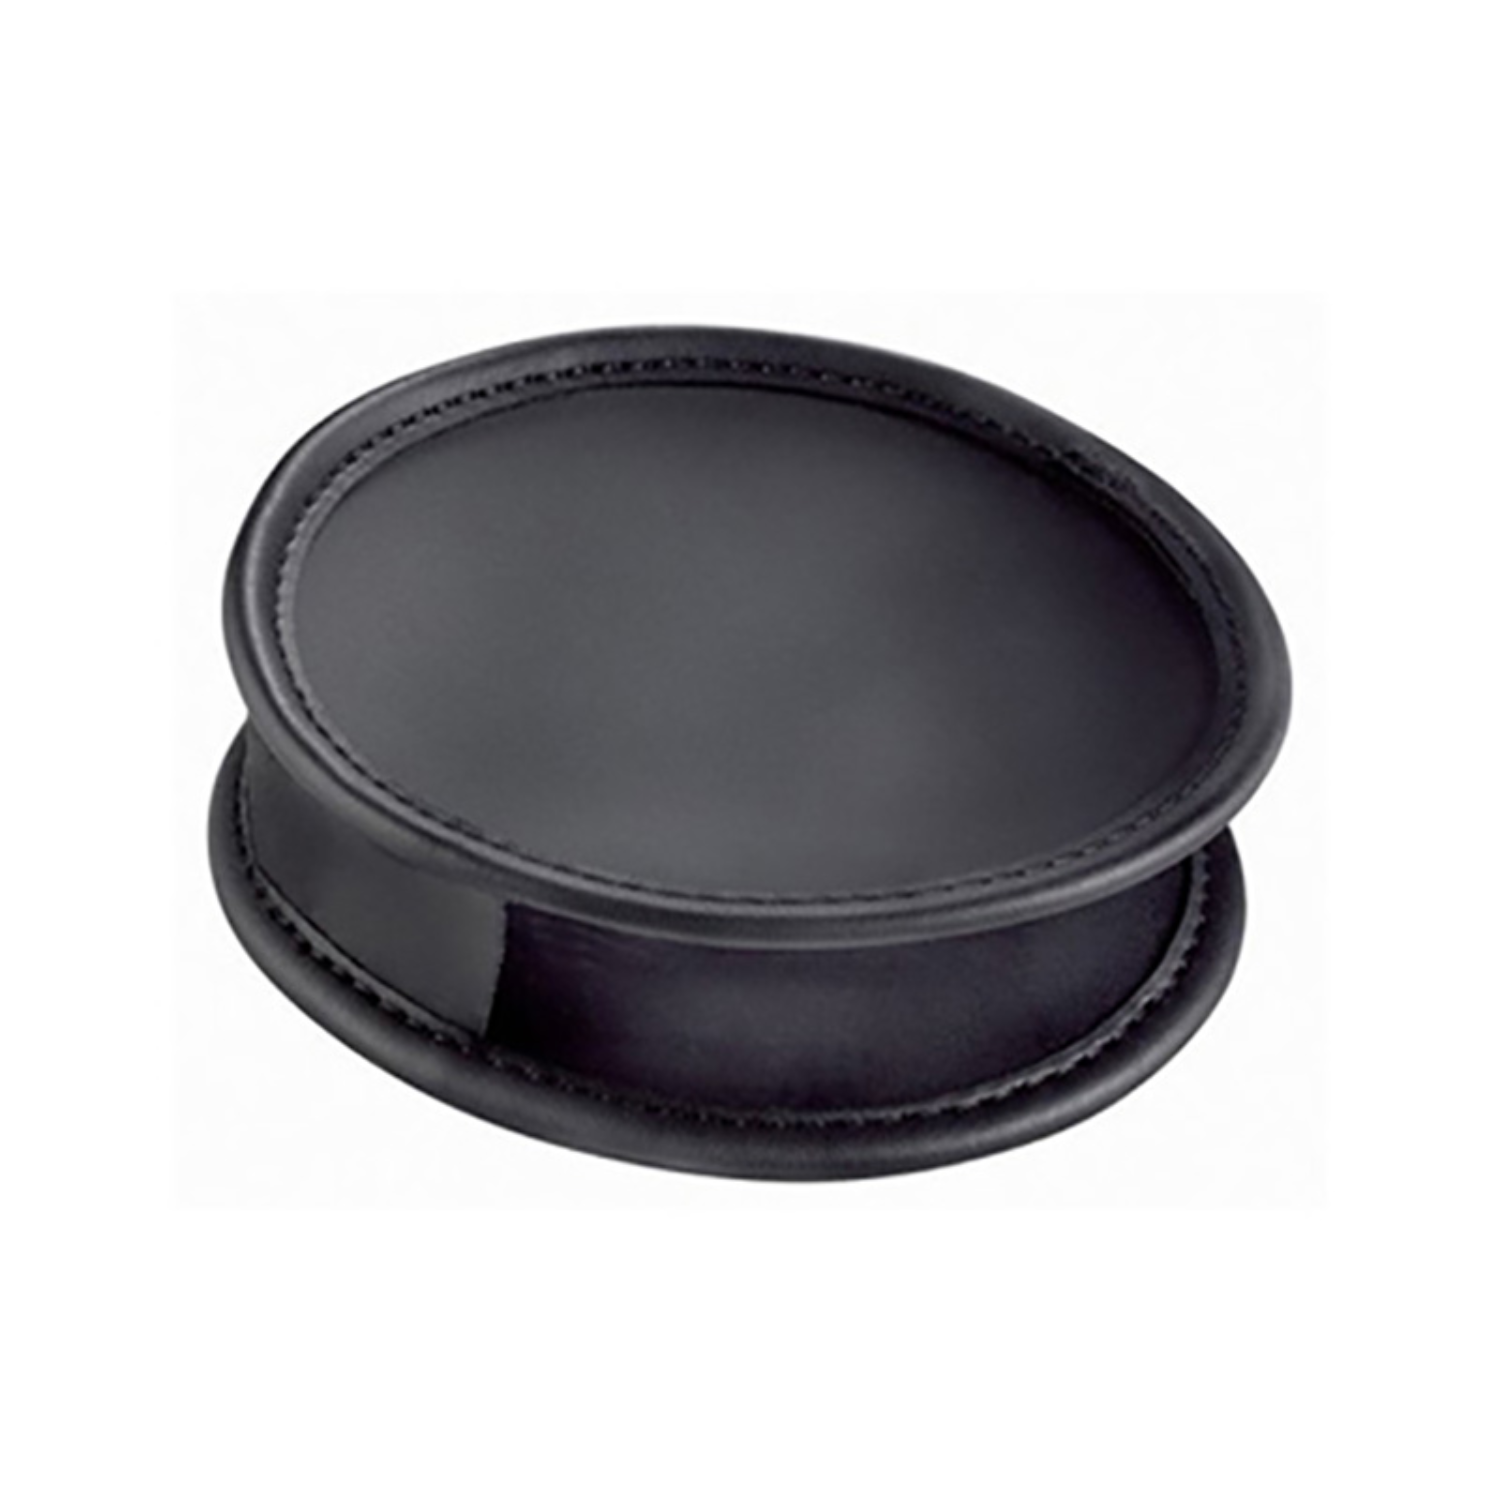 Image of the round Protective Case for Aspheric II Hand-held Magnifiers from Eschenbach in charcoal gray.